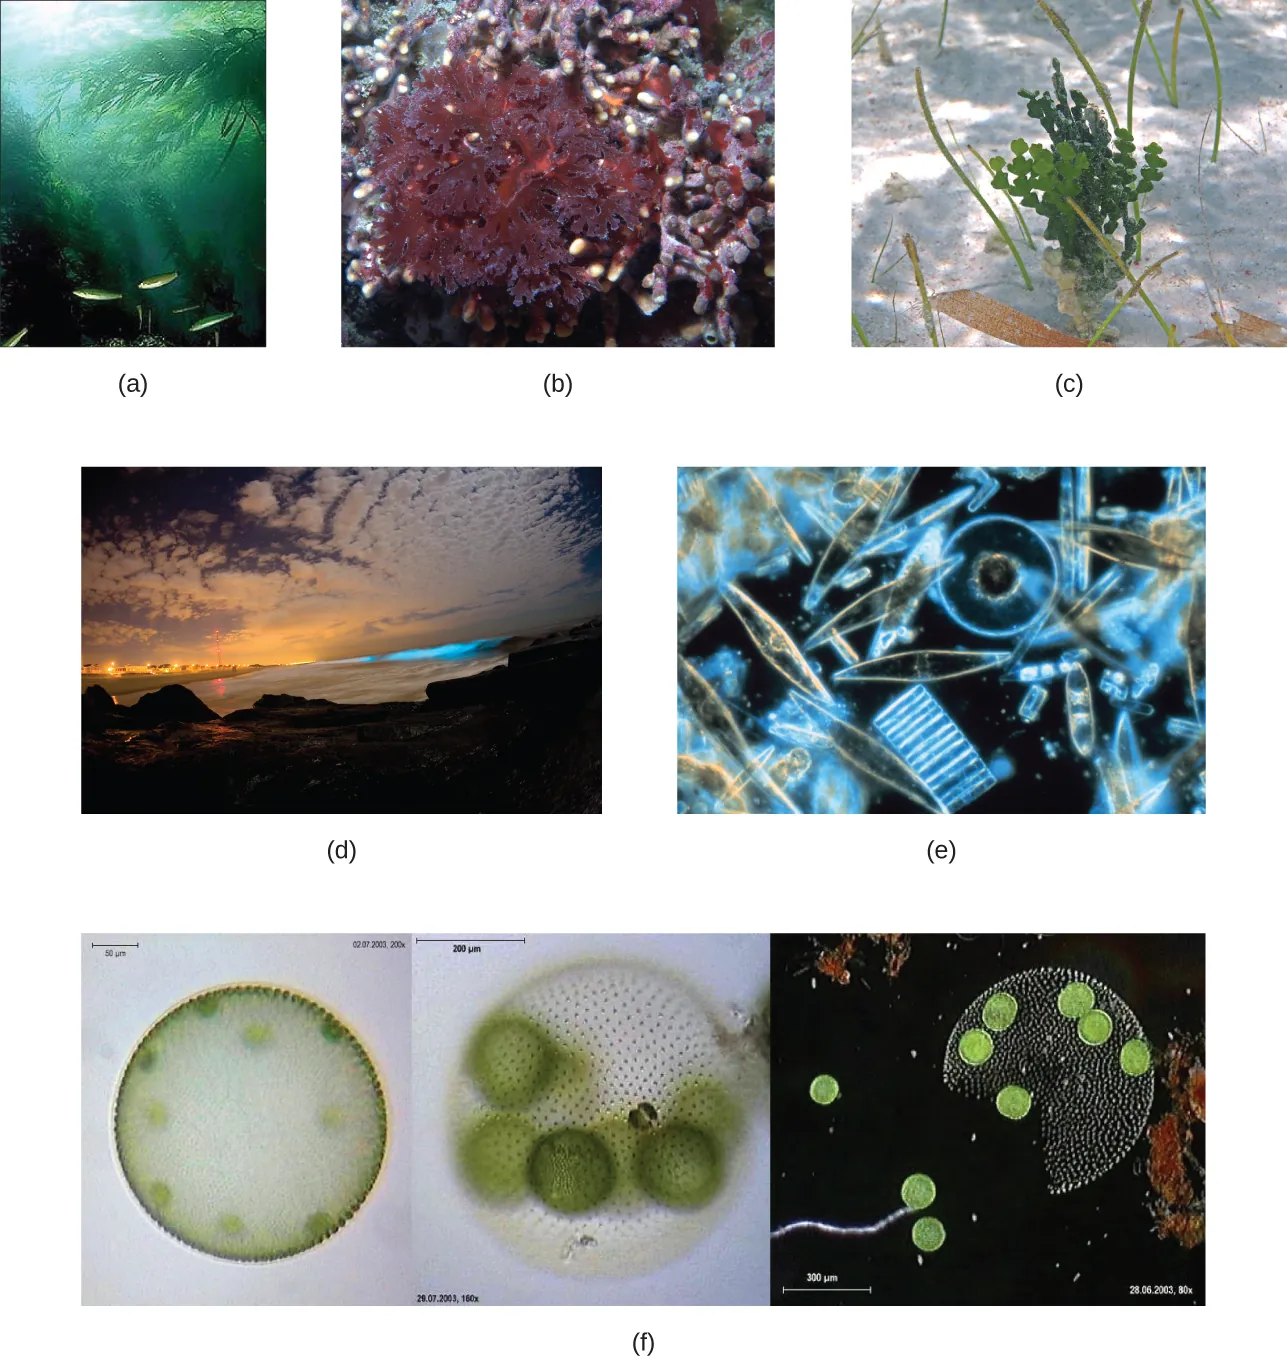 a) A photograph of long green kelp in the ocean b) A photograph of a red leafy structure. C) A photograph of a green leafy structure. D) a photograph of lighted regions of a waterway. E) A micrograph of cells of various shapes that look like they are made out of glass. F) a micrograph of a sphere made of many greed dots. Smaller greens spheres can be seen inside the larger sphere. The smaller spheres are released when the larger one ruptures.